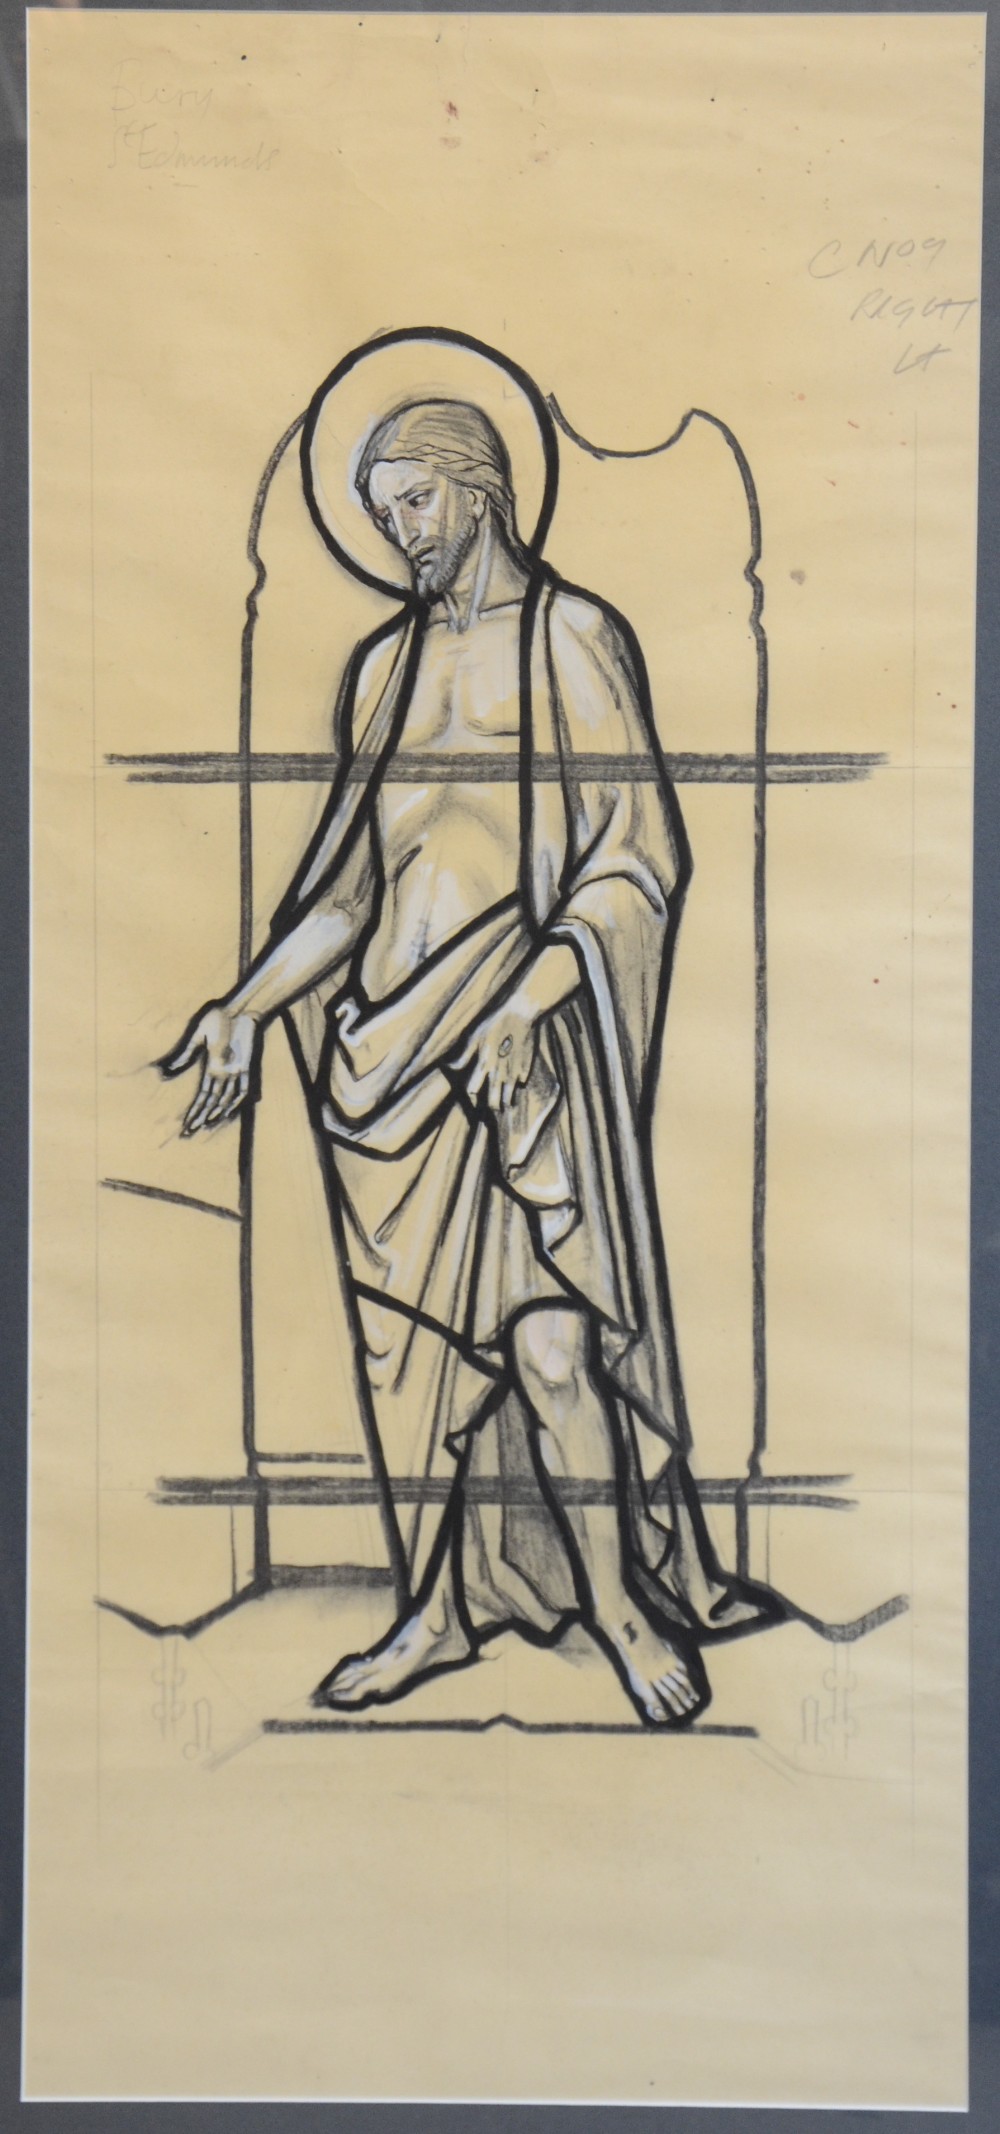 Preparatory sketch for a stained glass window, Bury St. Edmunds, depicting Christ, watercolour and